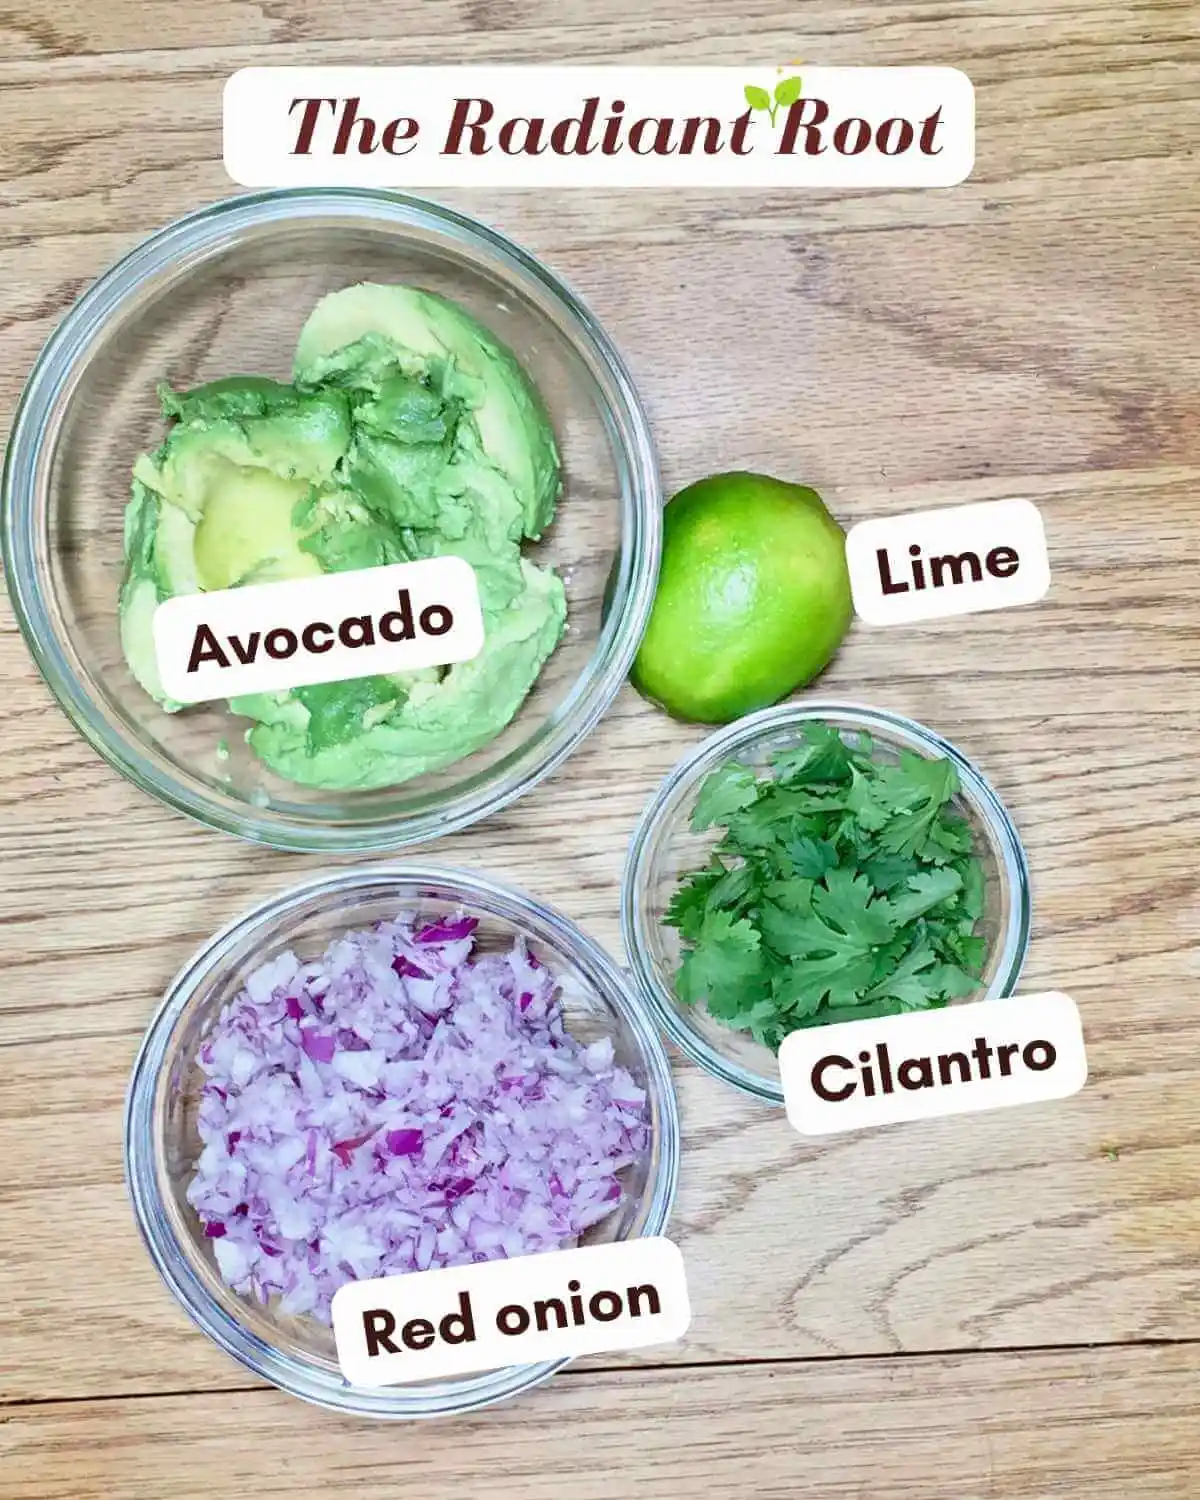 Food Processor Guacamole: At the top it reads “The Radiant Root.” There is a wooden table with small clear glass bowls containing the ingredients for food processor guacamole avocados, a lime, red onion, and cilantro with the names of the ingredients next to them. | Ingredients for guacamole | The Radiant Root